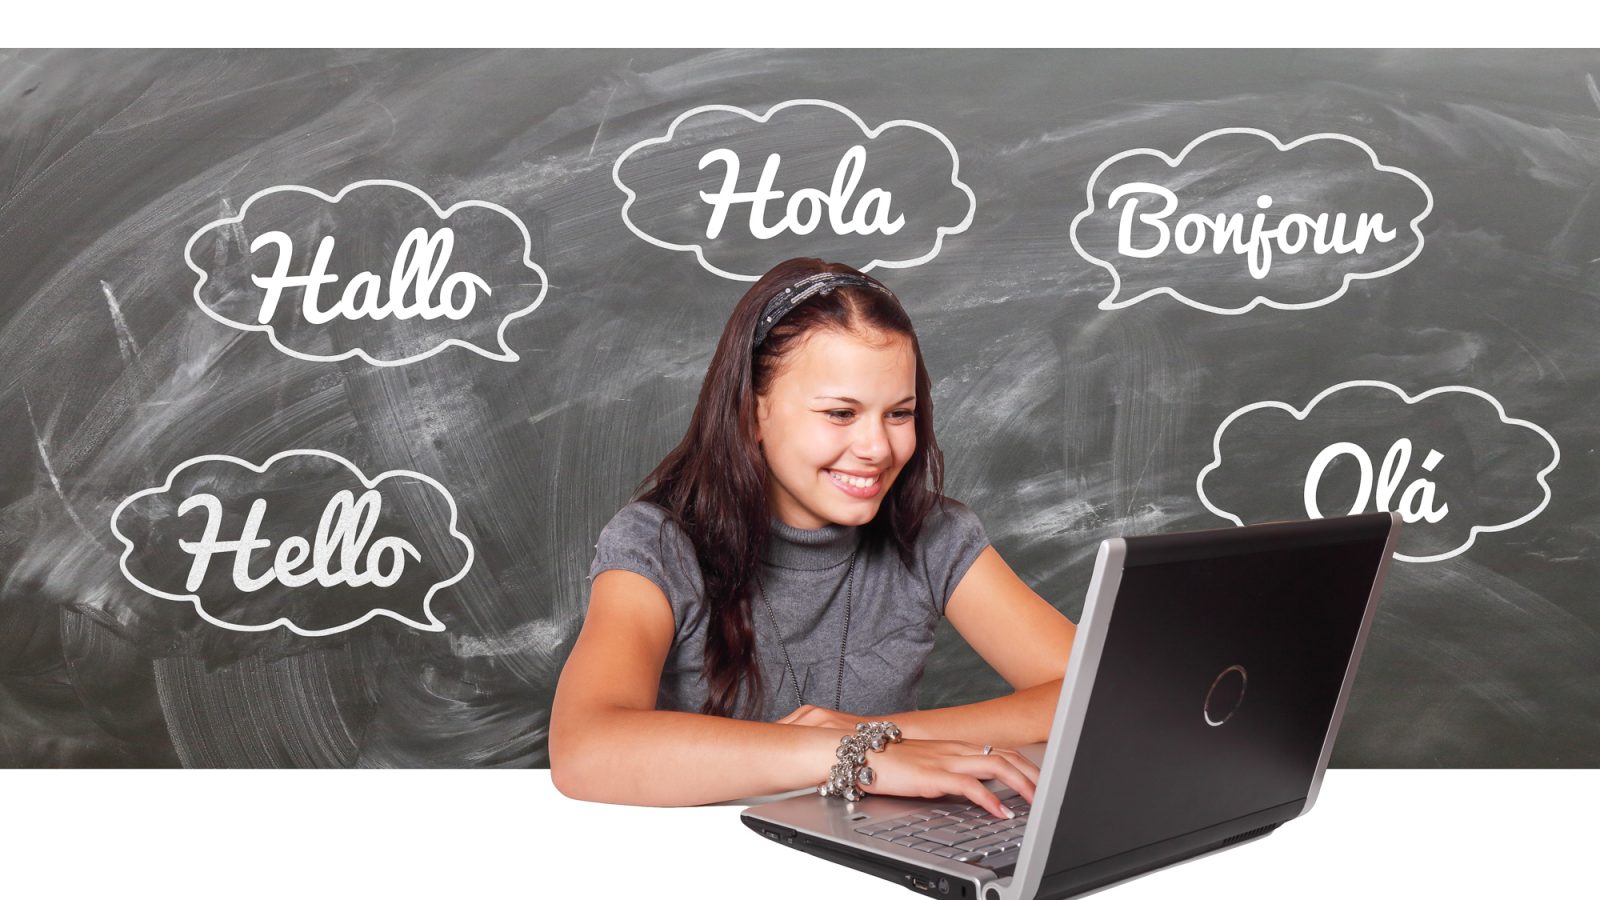 The funniest stock images from Rosetta Stone | Where does Rosetta Stone get their stock images? | Learning a new language with rosetta stone and their hilarious pictures